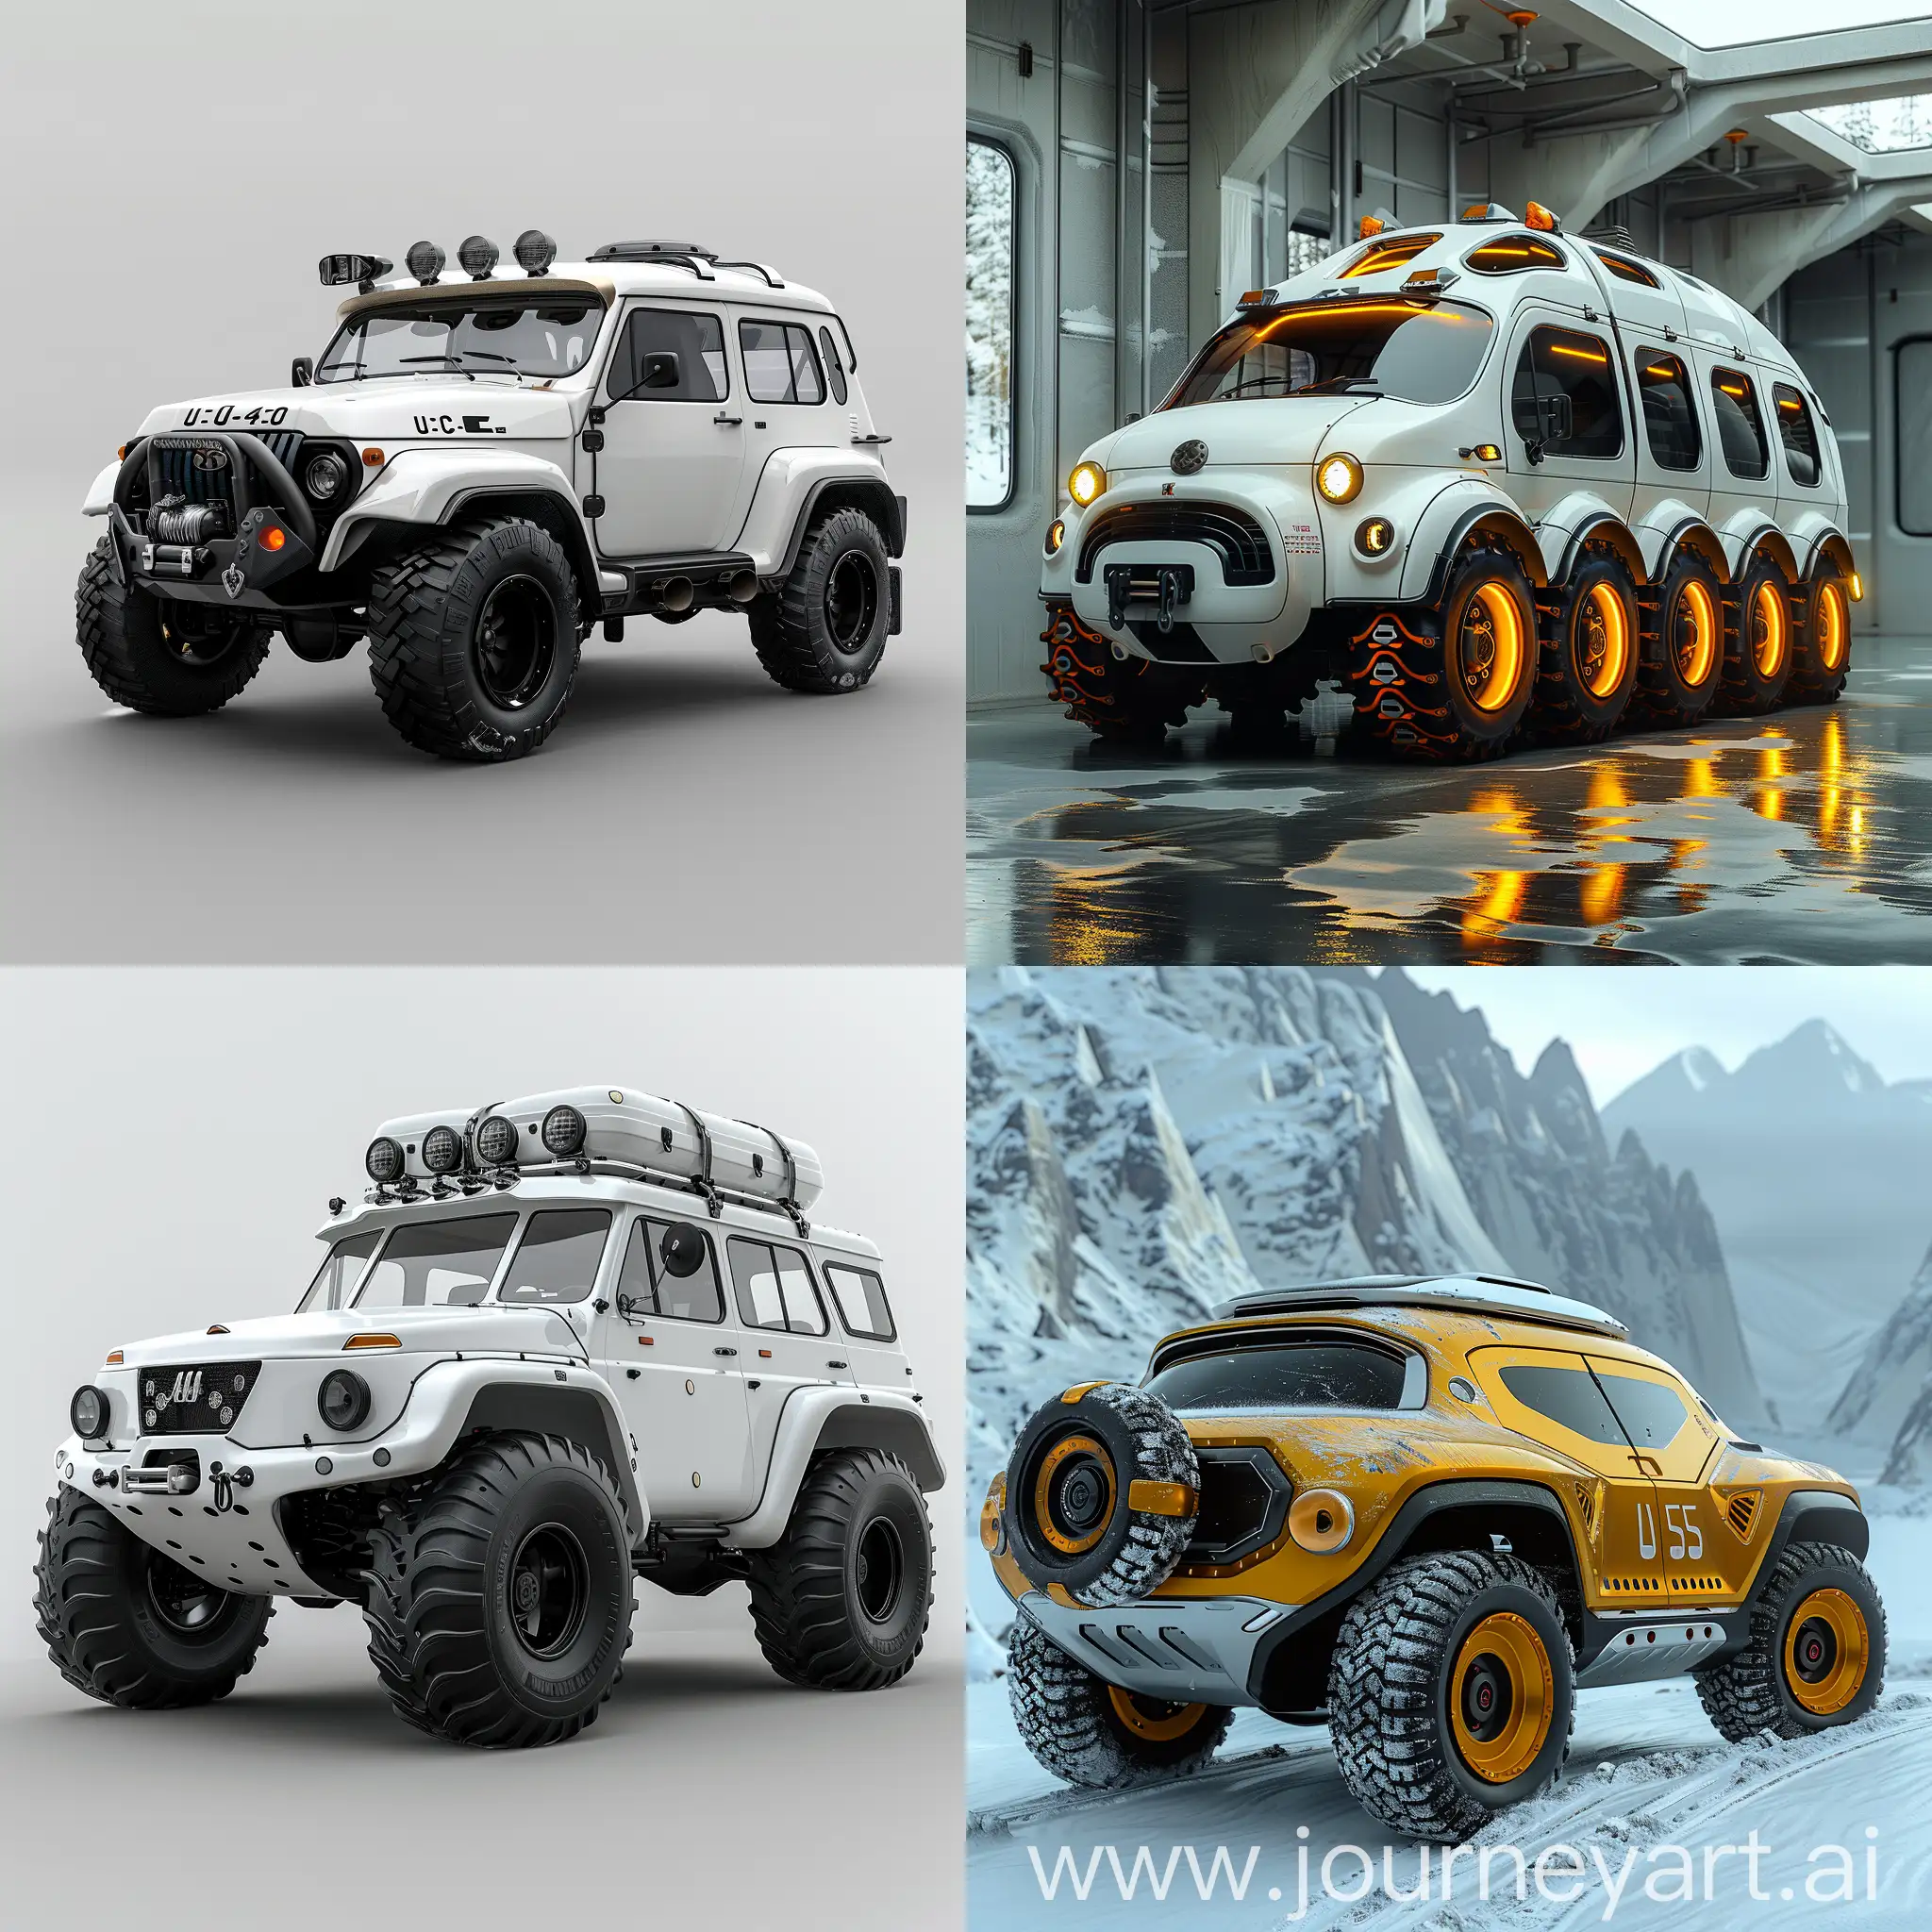 Futuristic UAZ-452, futuristic style of high tech, carbon footprint protection, octane render --stylize 1000